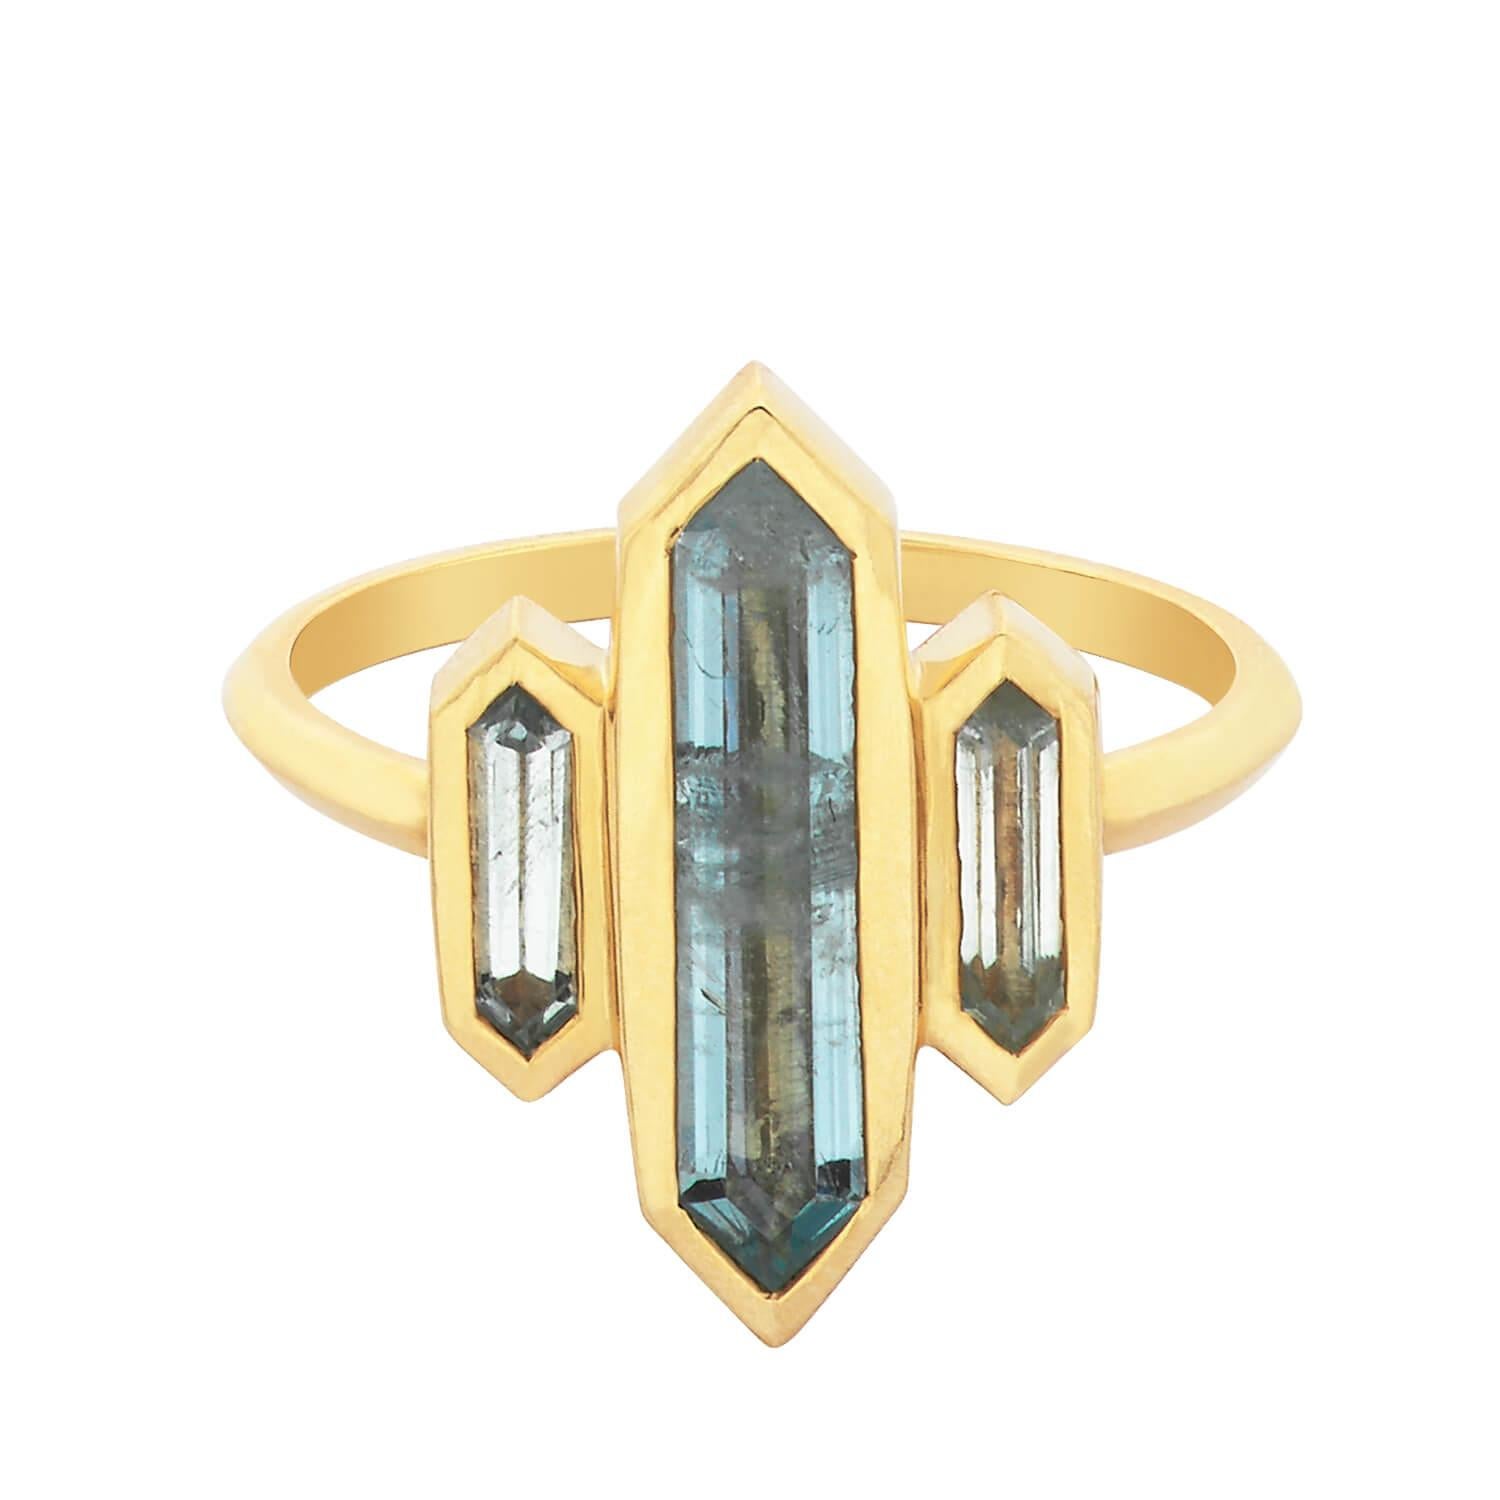 Ring size: 56

Kailas is the center of the Buddhist universe, and the mountain, as well as two lakes over which it rises, have been sacred to Buddhists, Hindus, Jains, and Bonpos for thousands of years.

The Kailas ring features three crystal cut